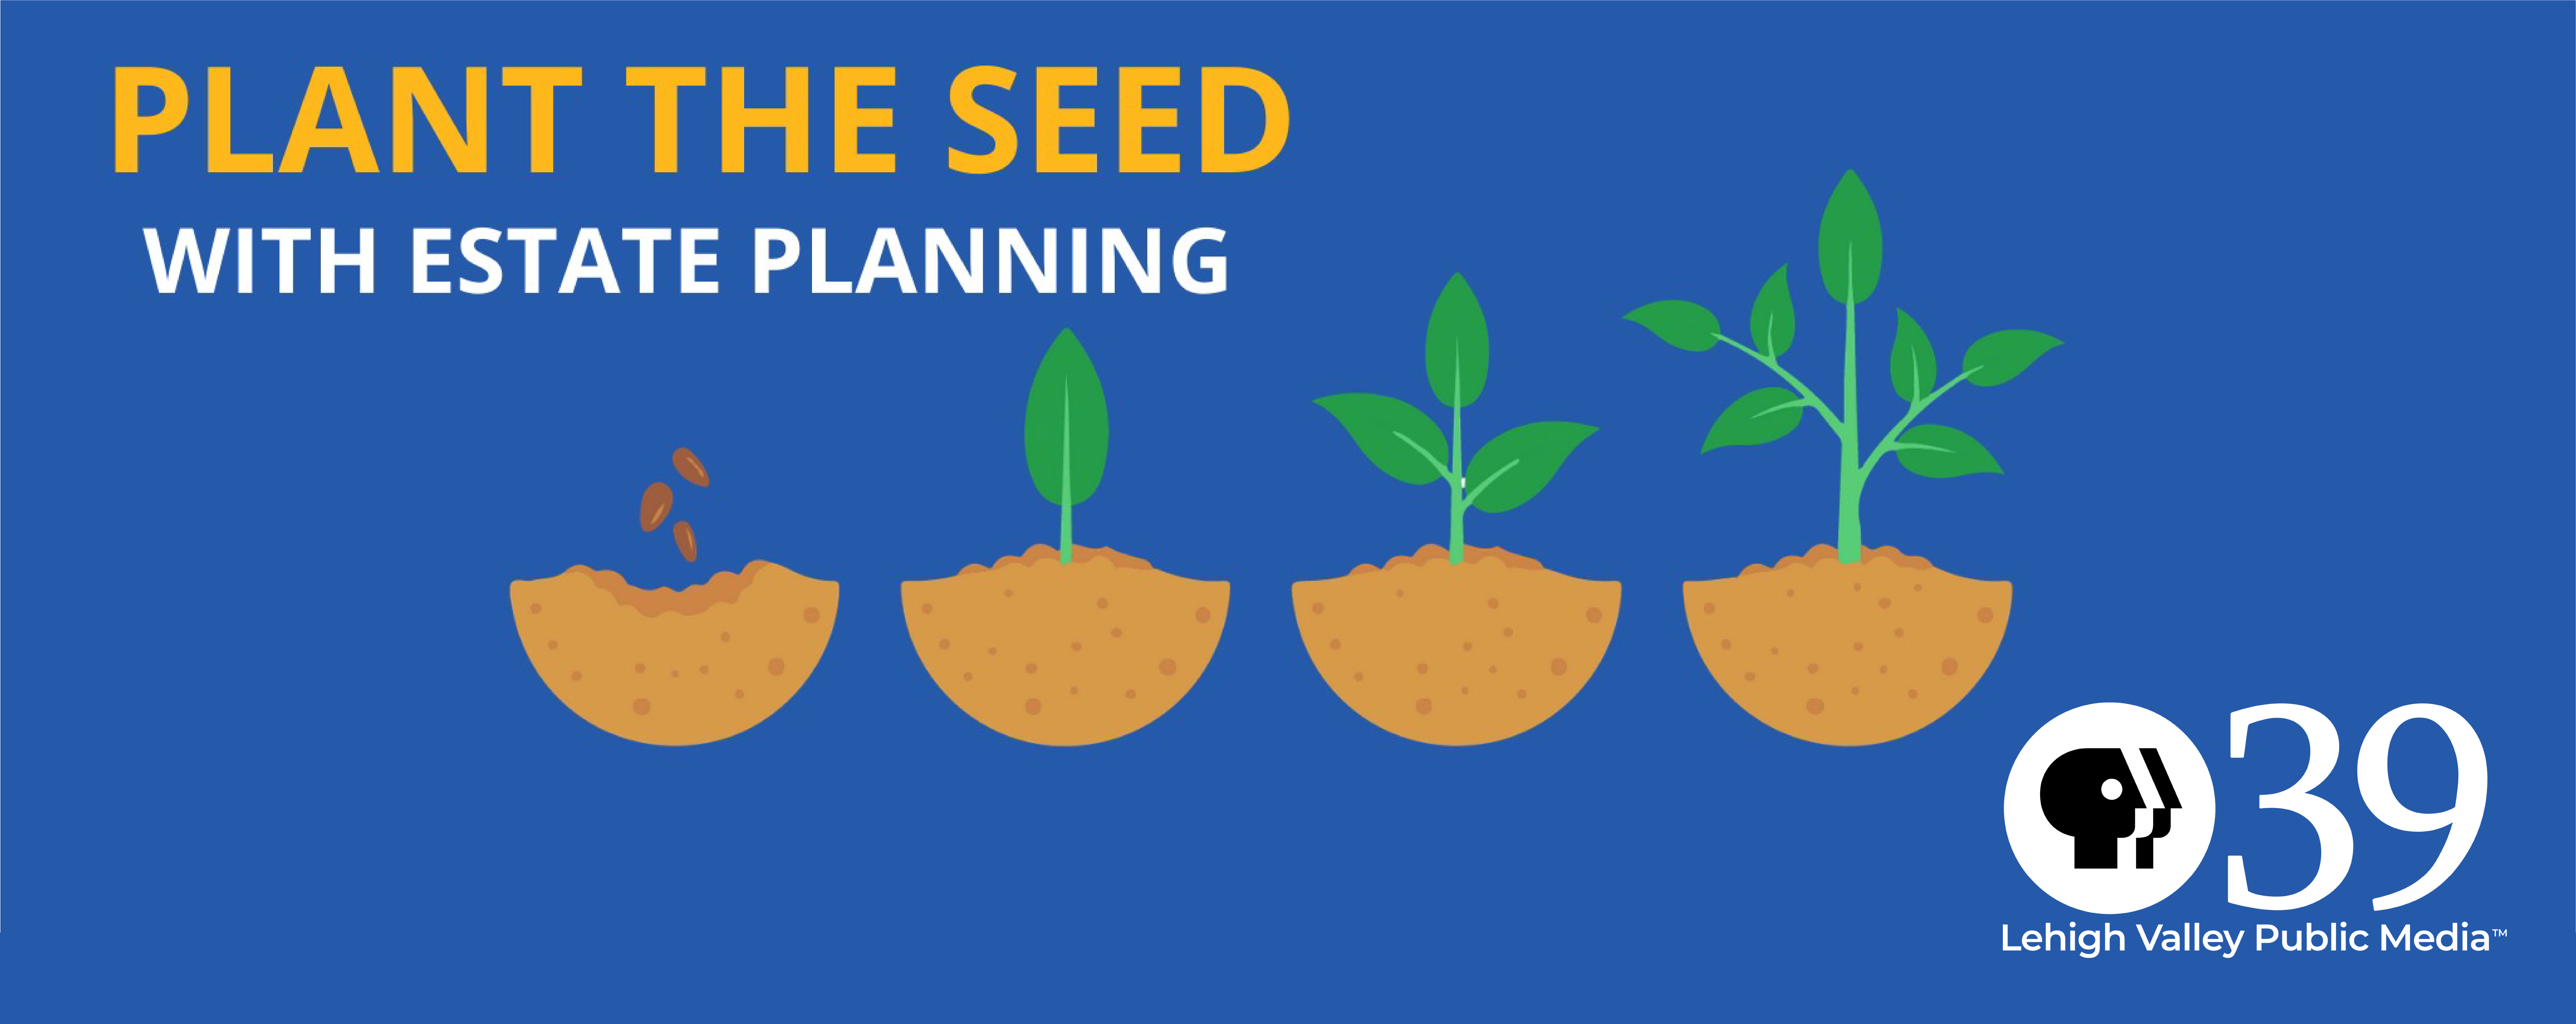 Plant the Seed with Estate Planning, Lehigh Valley Public Media